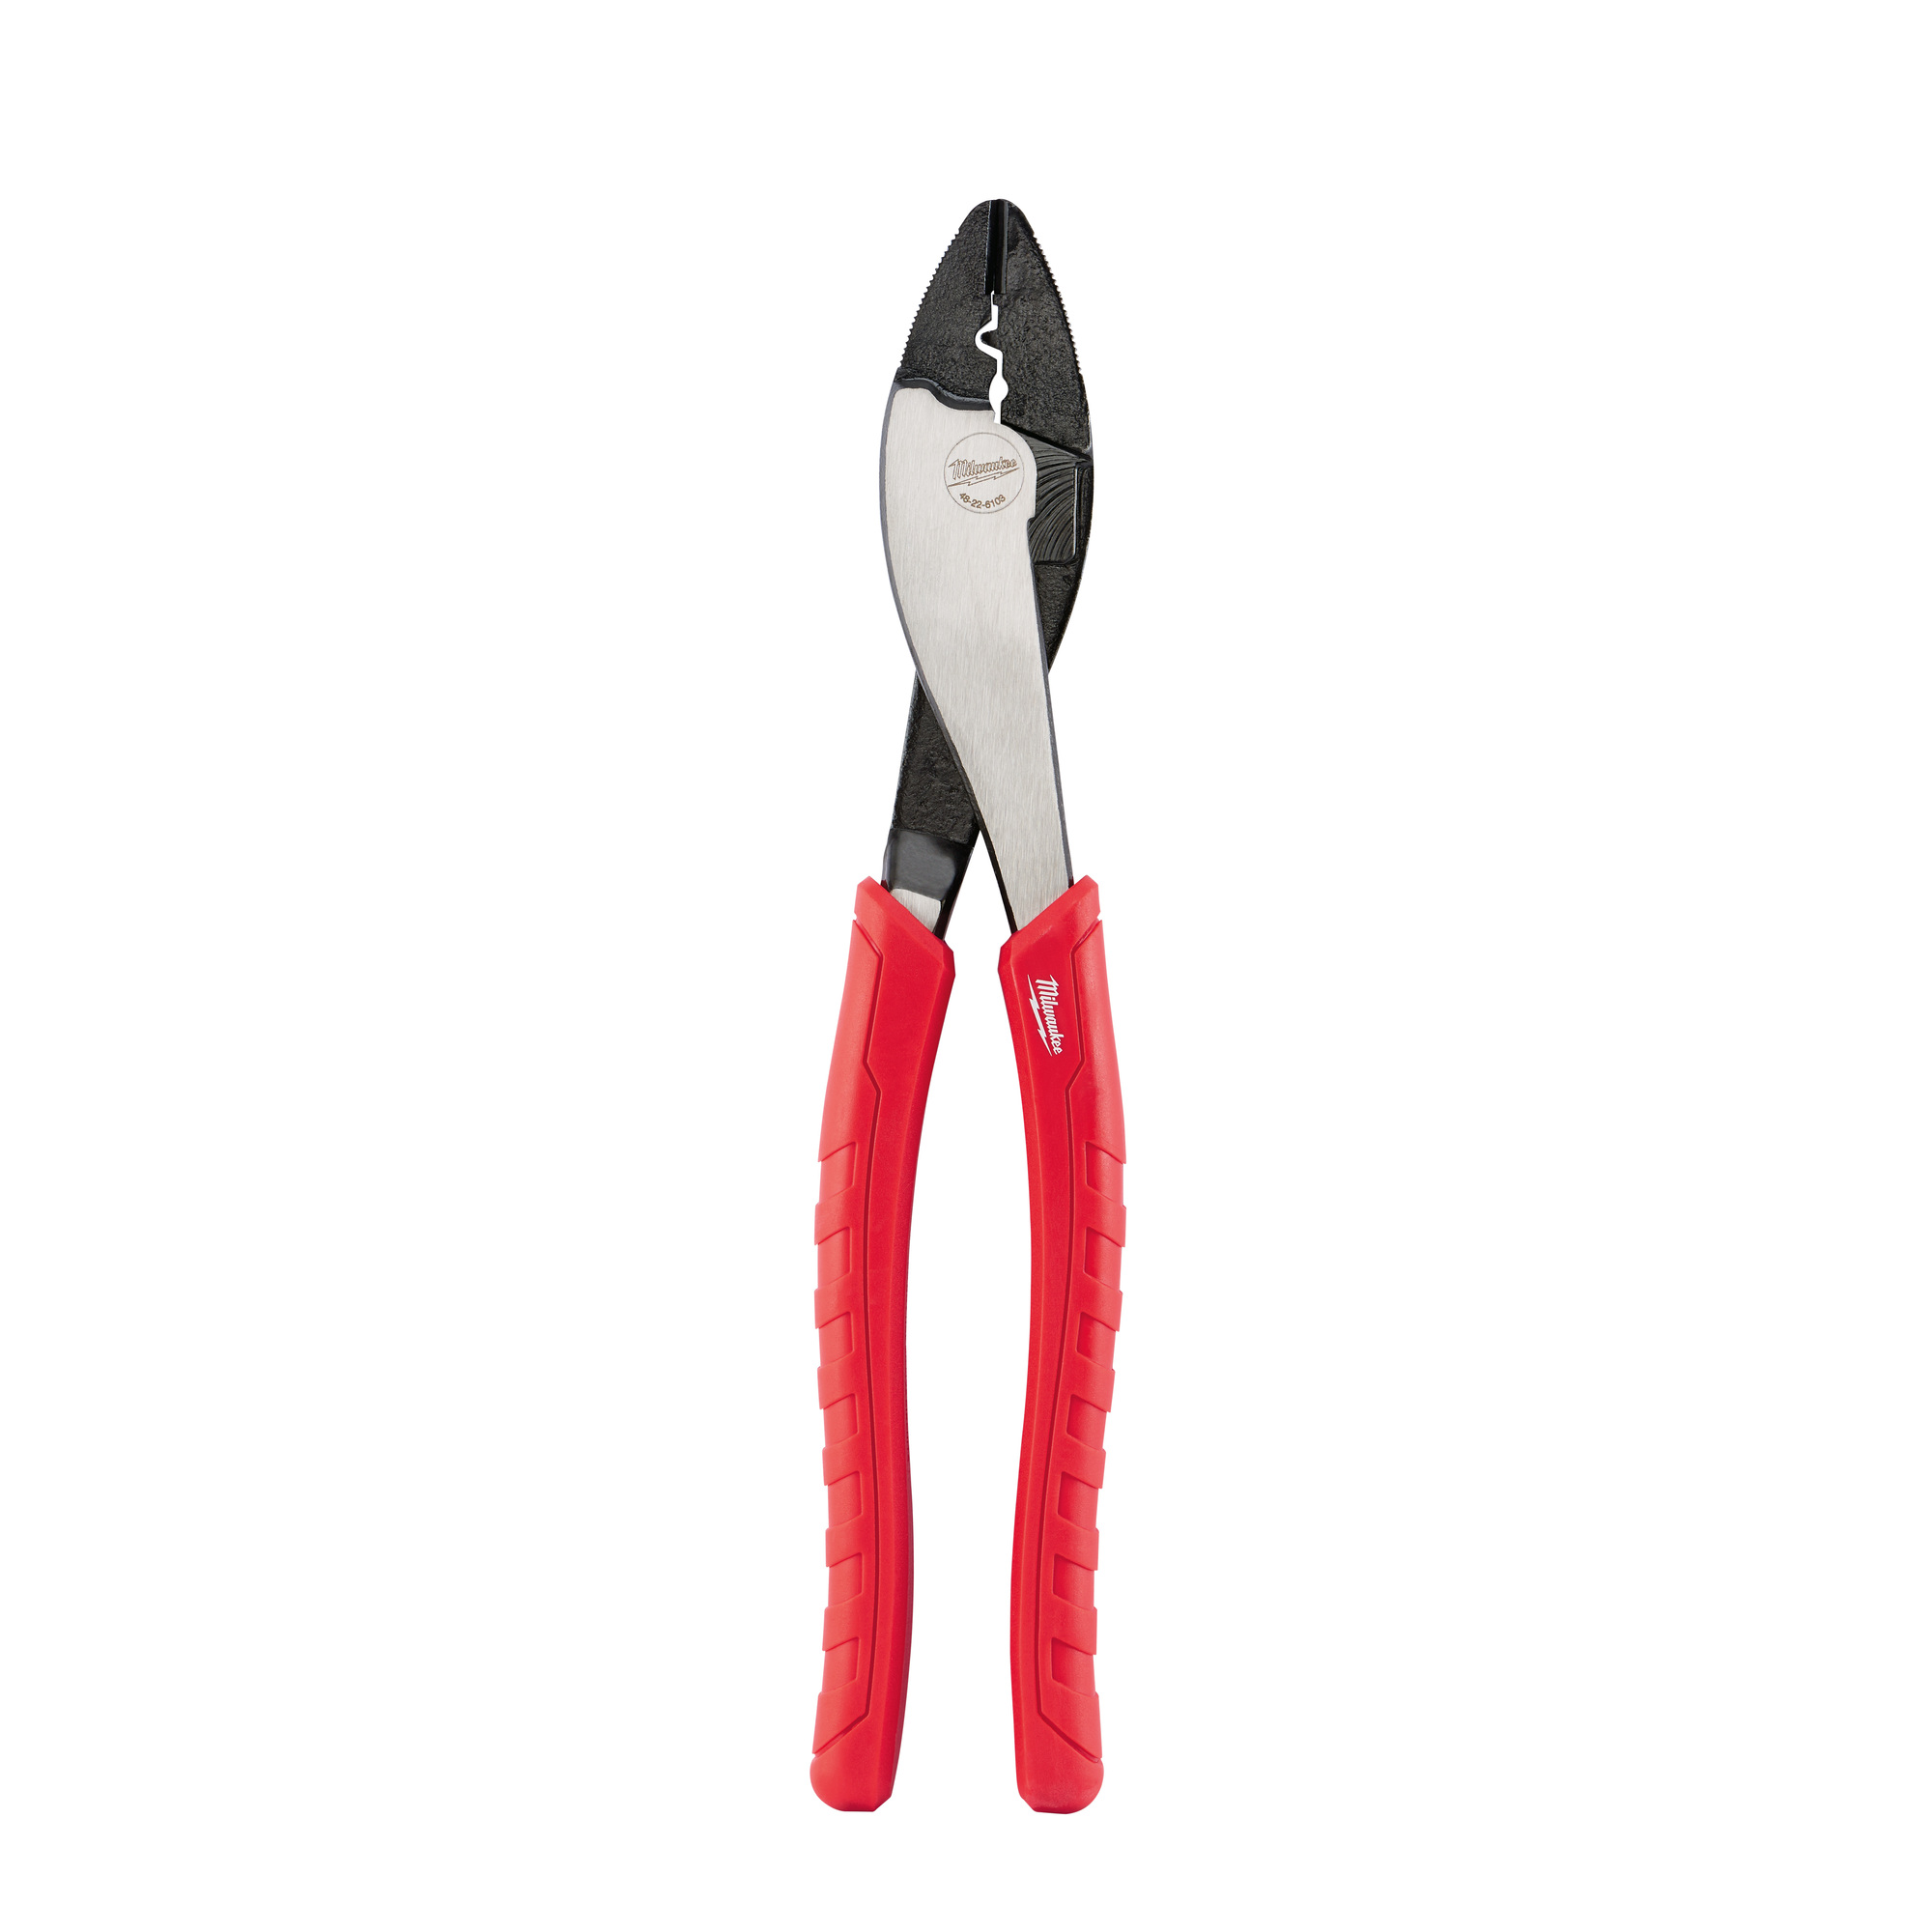 Milwaukee, Comfort Grip Crimping Pliers, Pieces (qty.) 1, Material Metal, Jaw Capacity 1.95 in, Model 48-22-6103